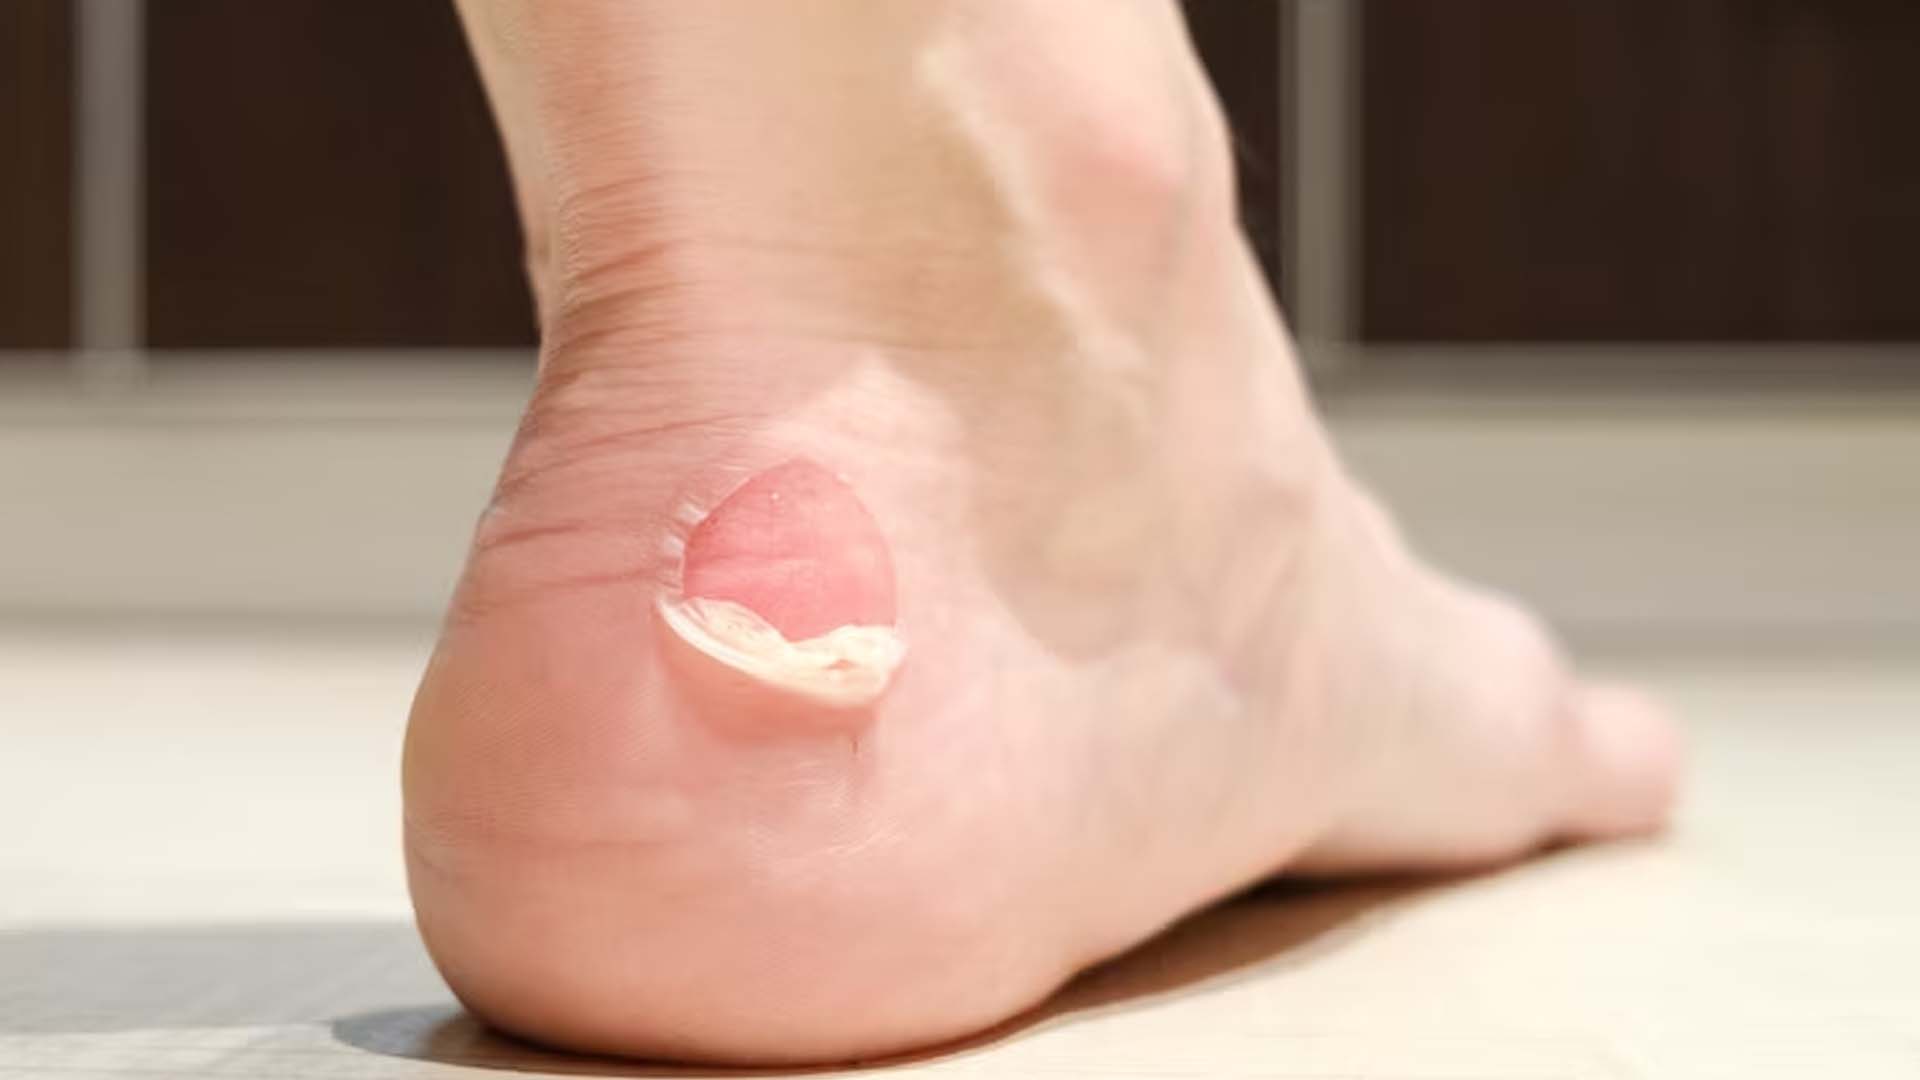 Blisters on foot